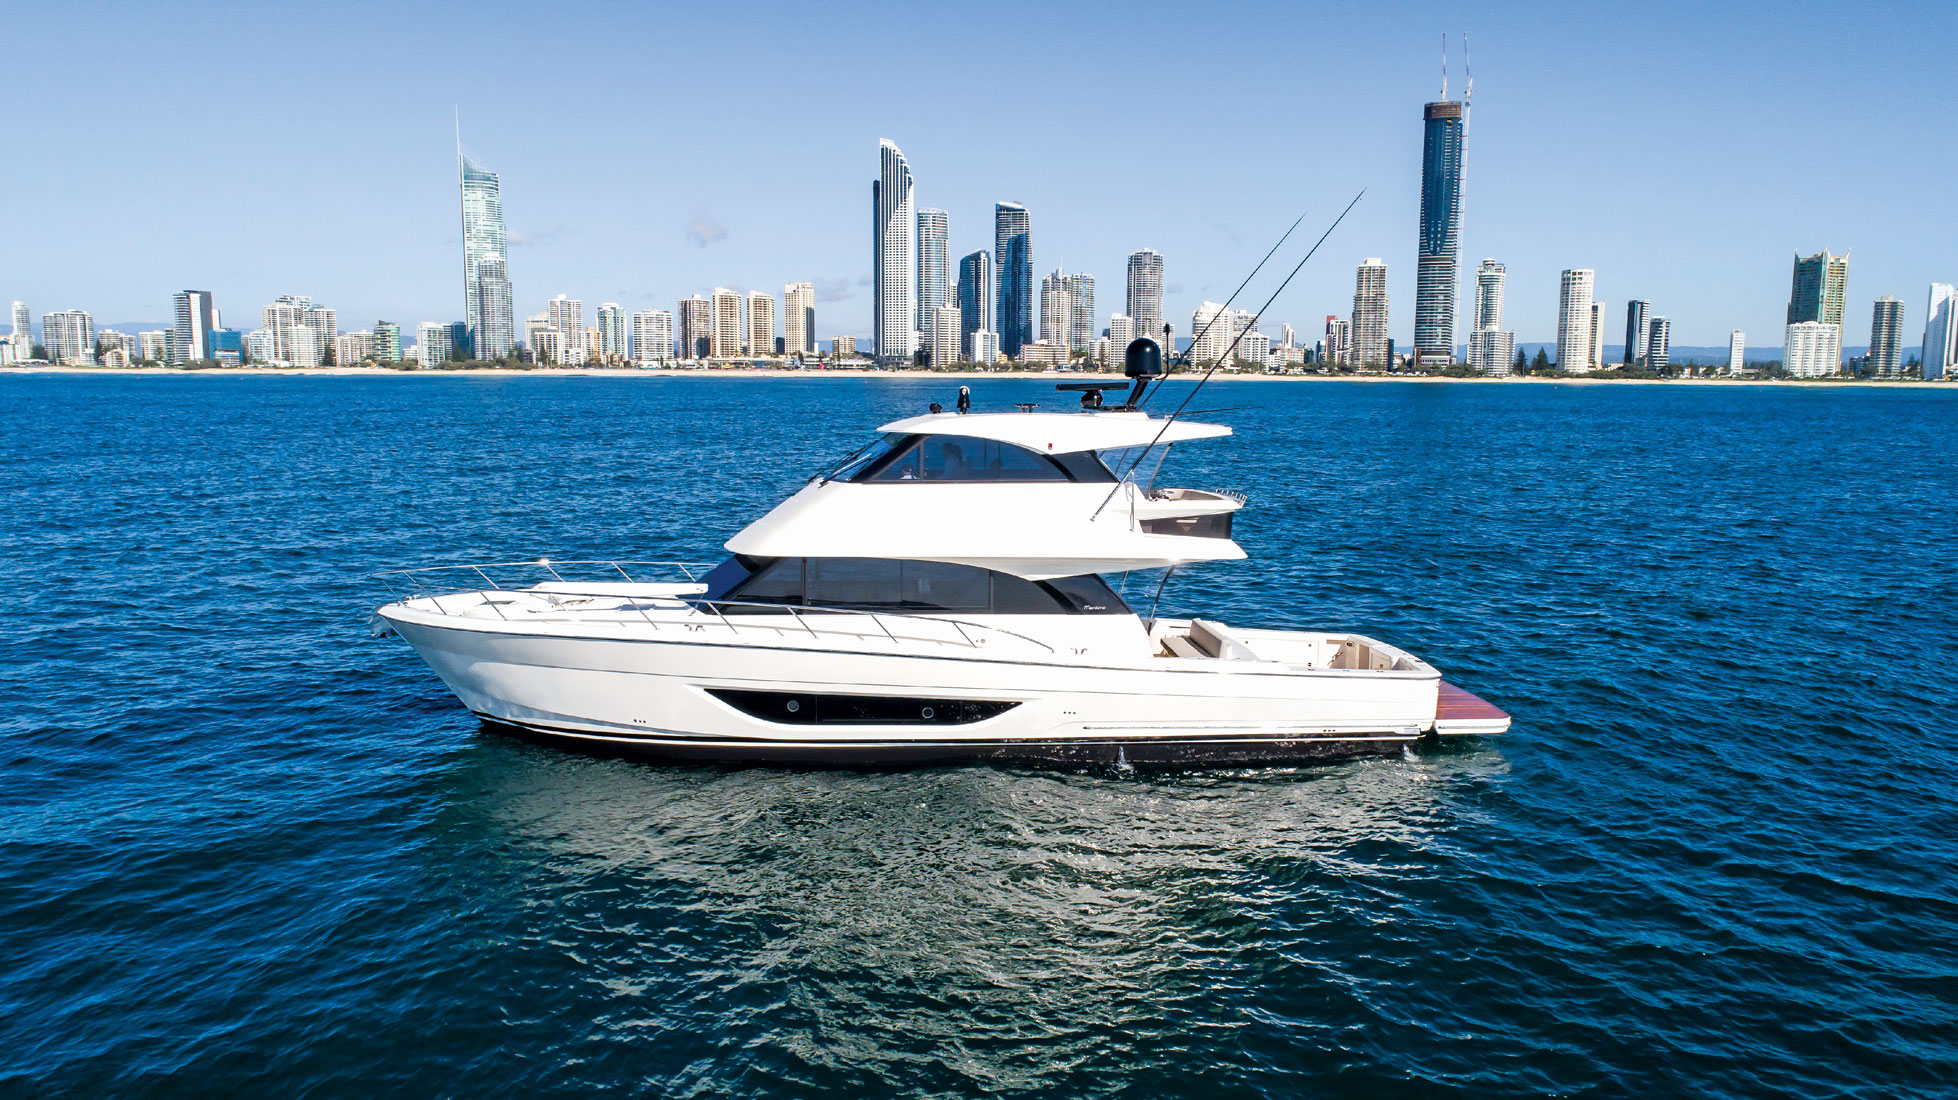 Maritimo M600 side view | Trade a boat